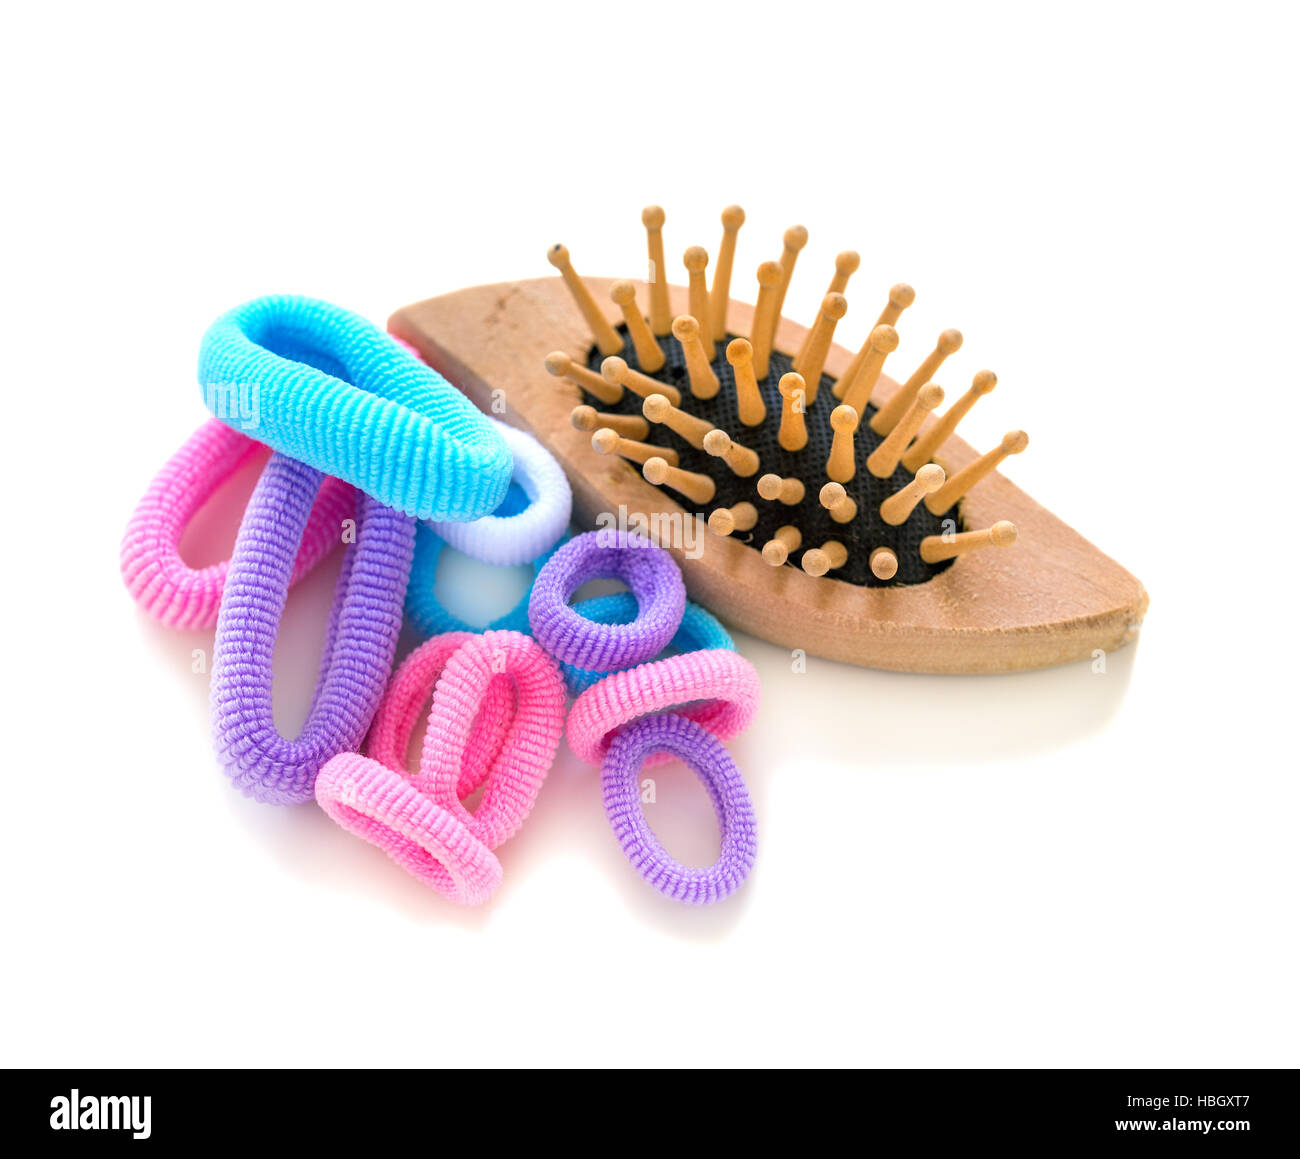 Wooden brush and rubber bands for hair. Stock Photo